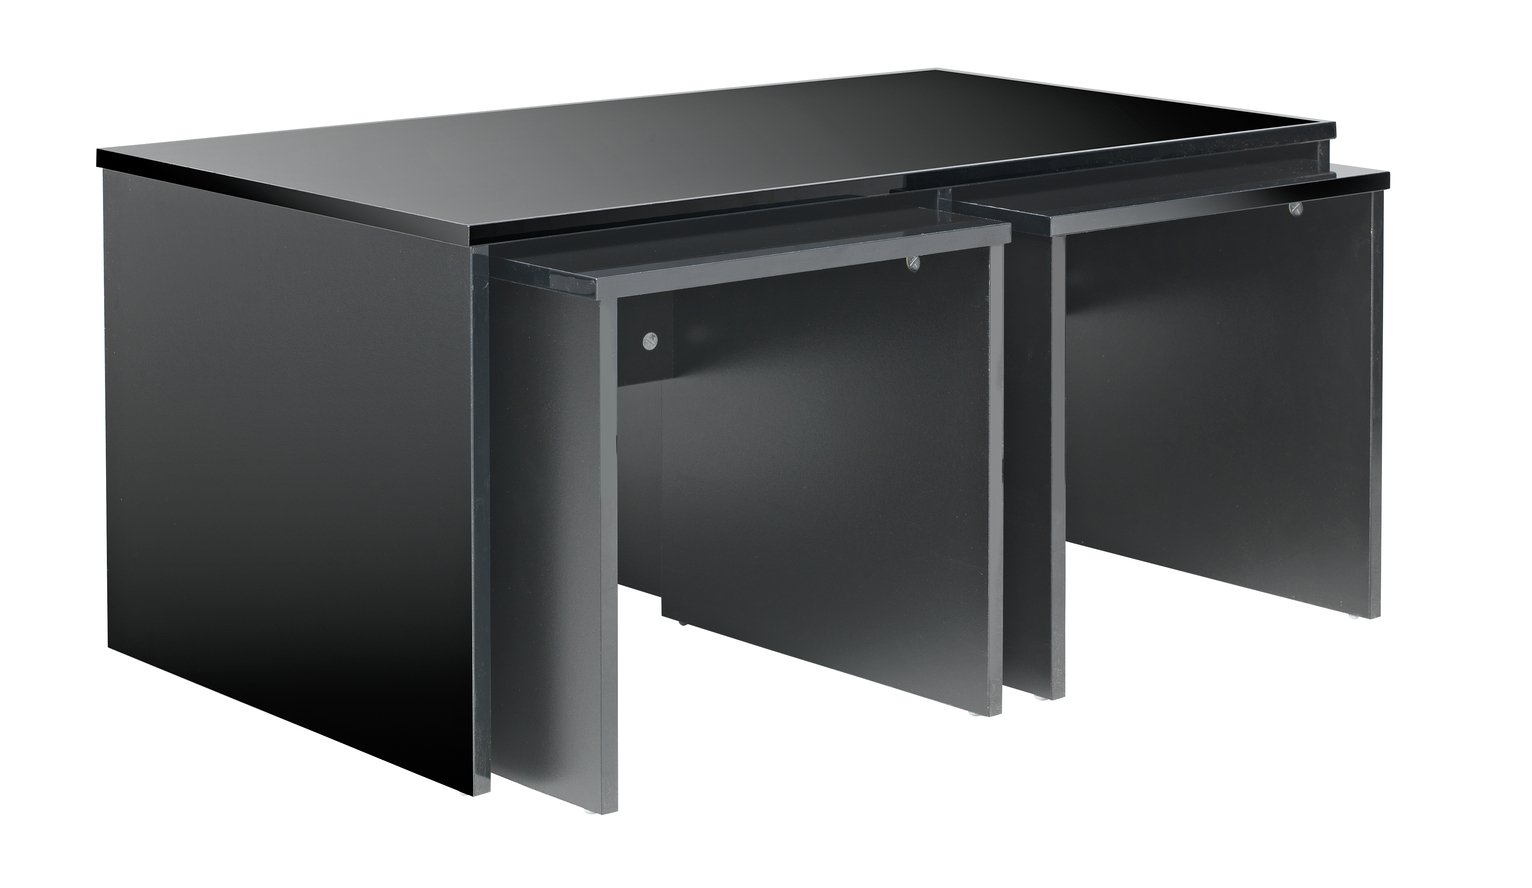 Argos Home Hayward Large Table and Two Small Tables - Black at Argos